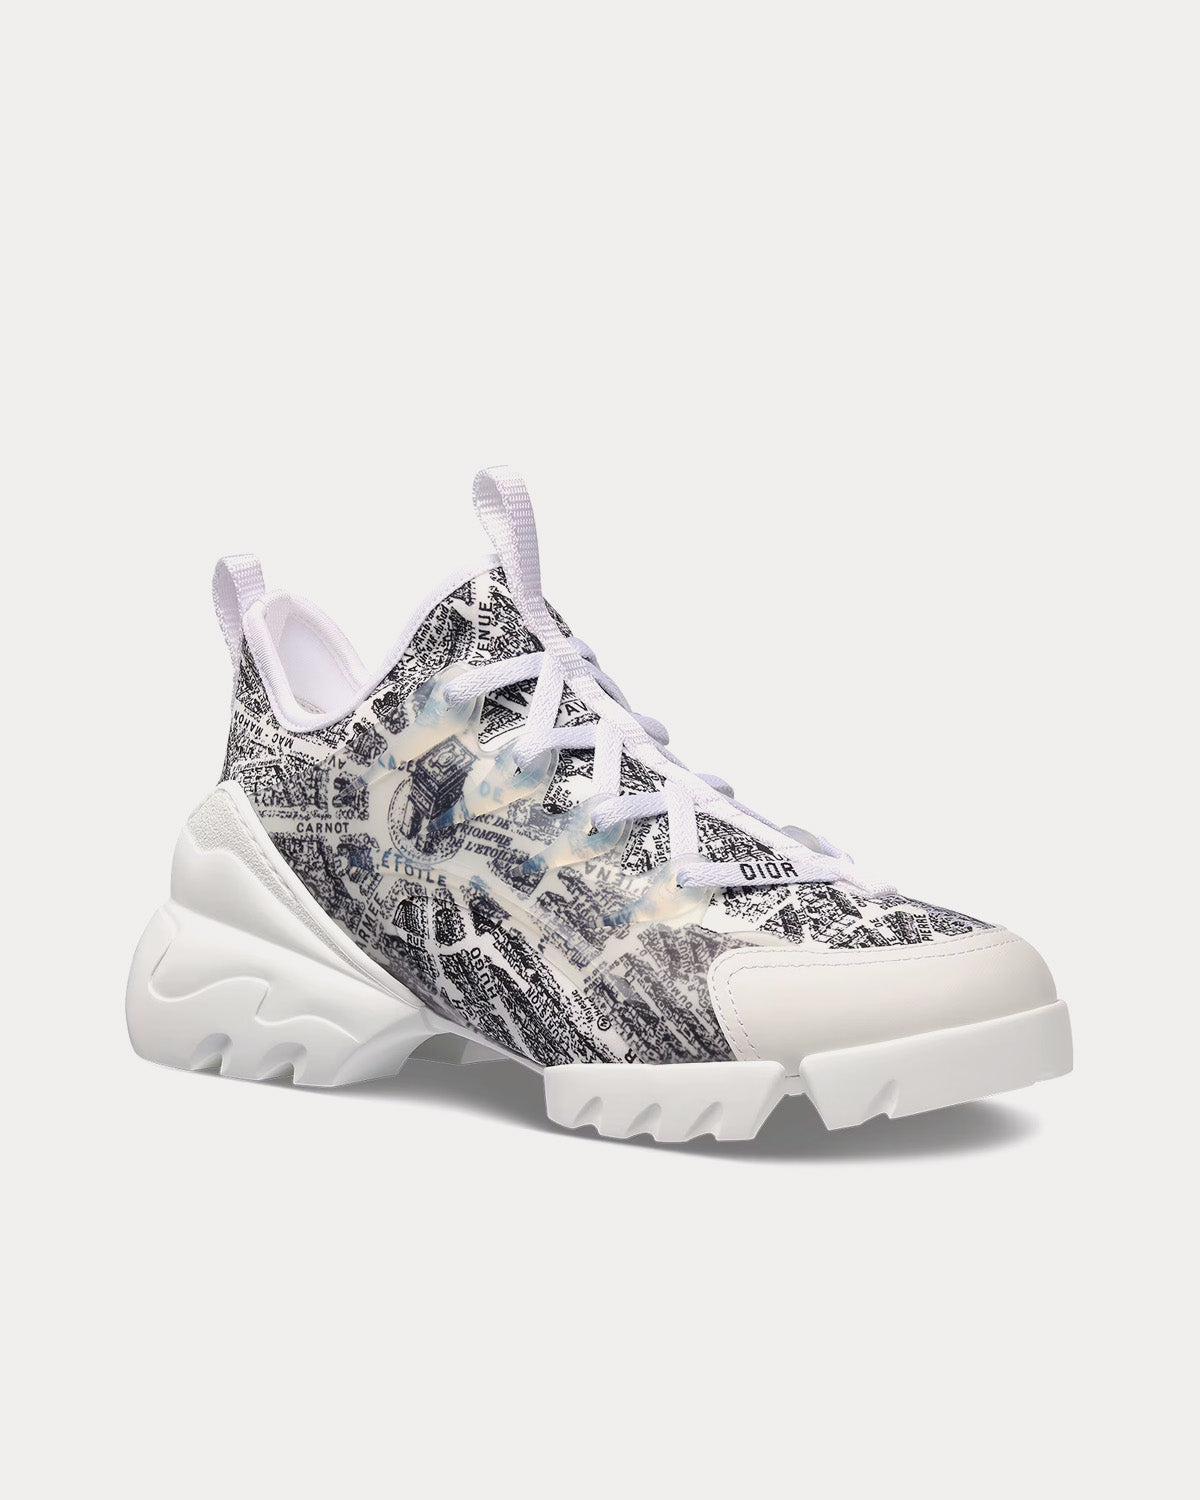 Dior - D-Connect Black and White Technical Fabric with Plan de Paris Print Low Top Sneakers